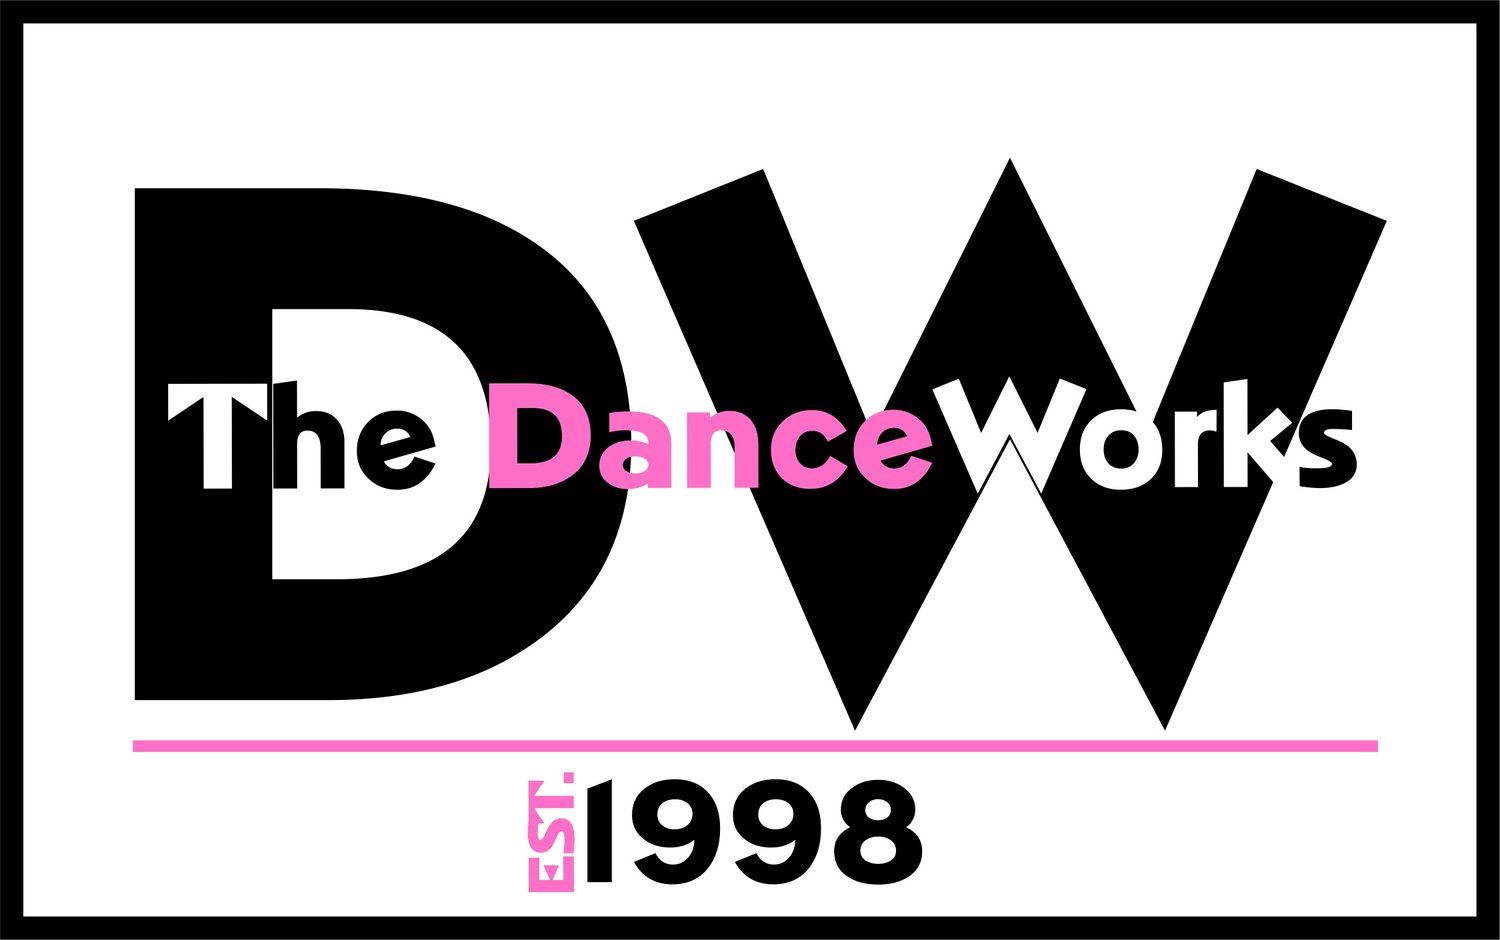 The Dance Works